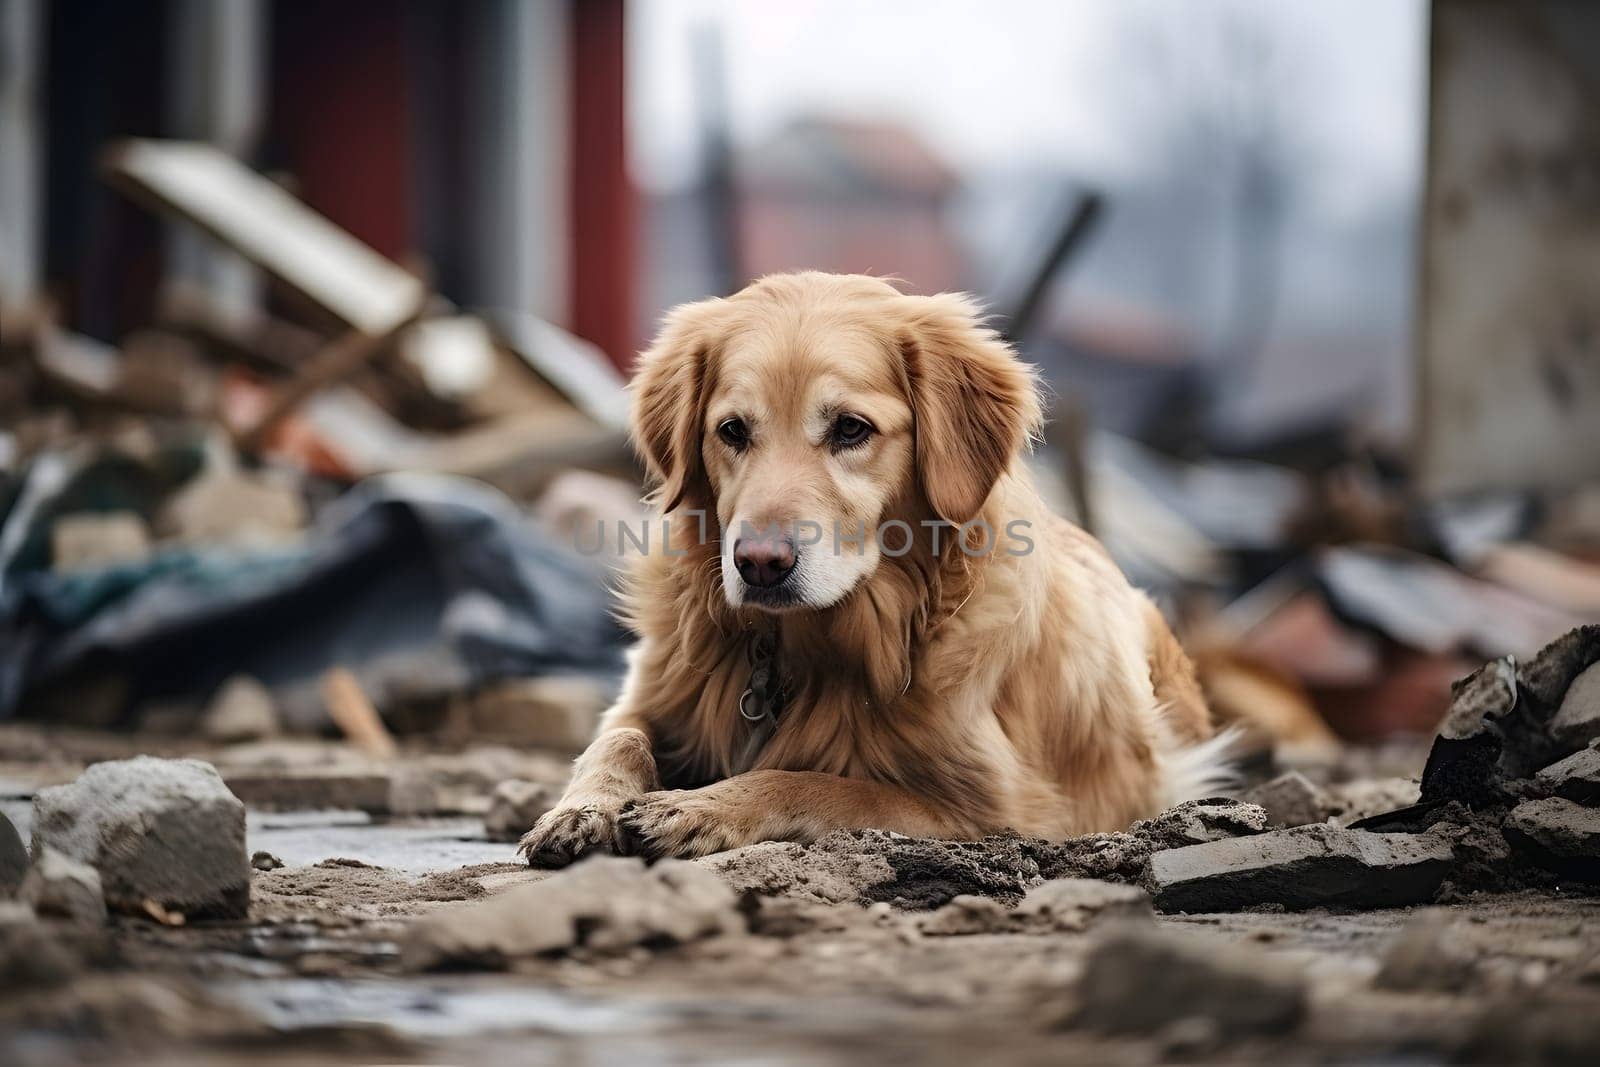 Alone wet dirty Golden Retriever after disaster on the background of house rubble. Neural network generated image. Not based on any actual scene.